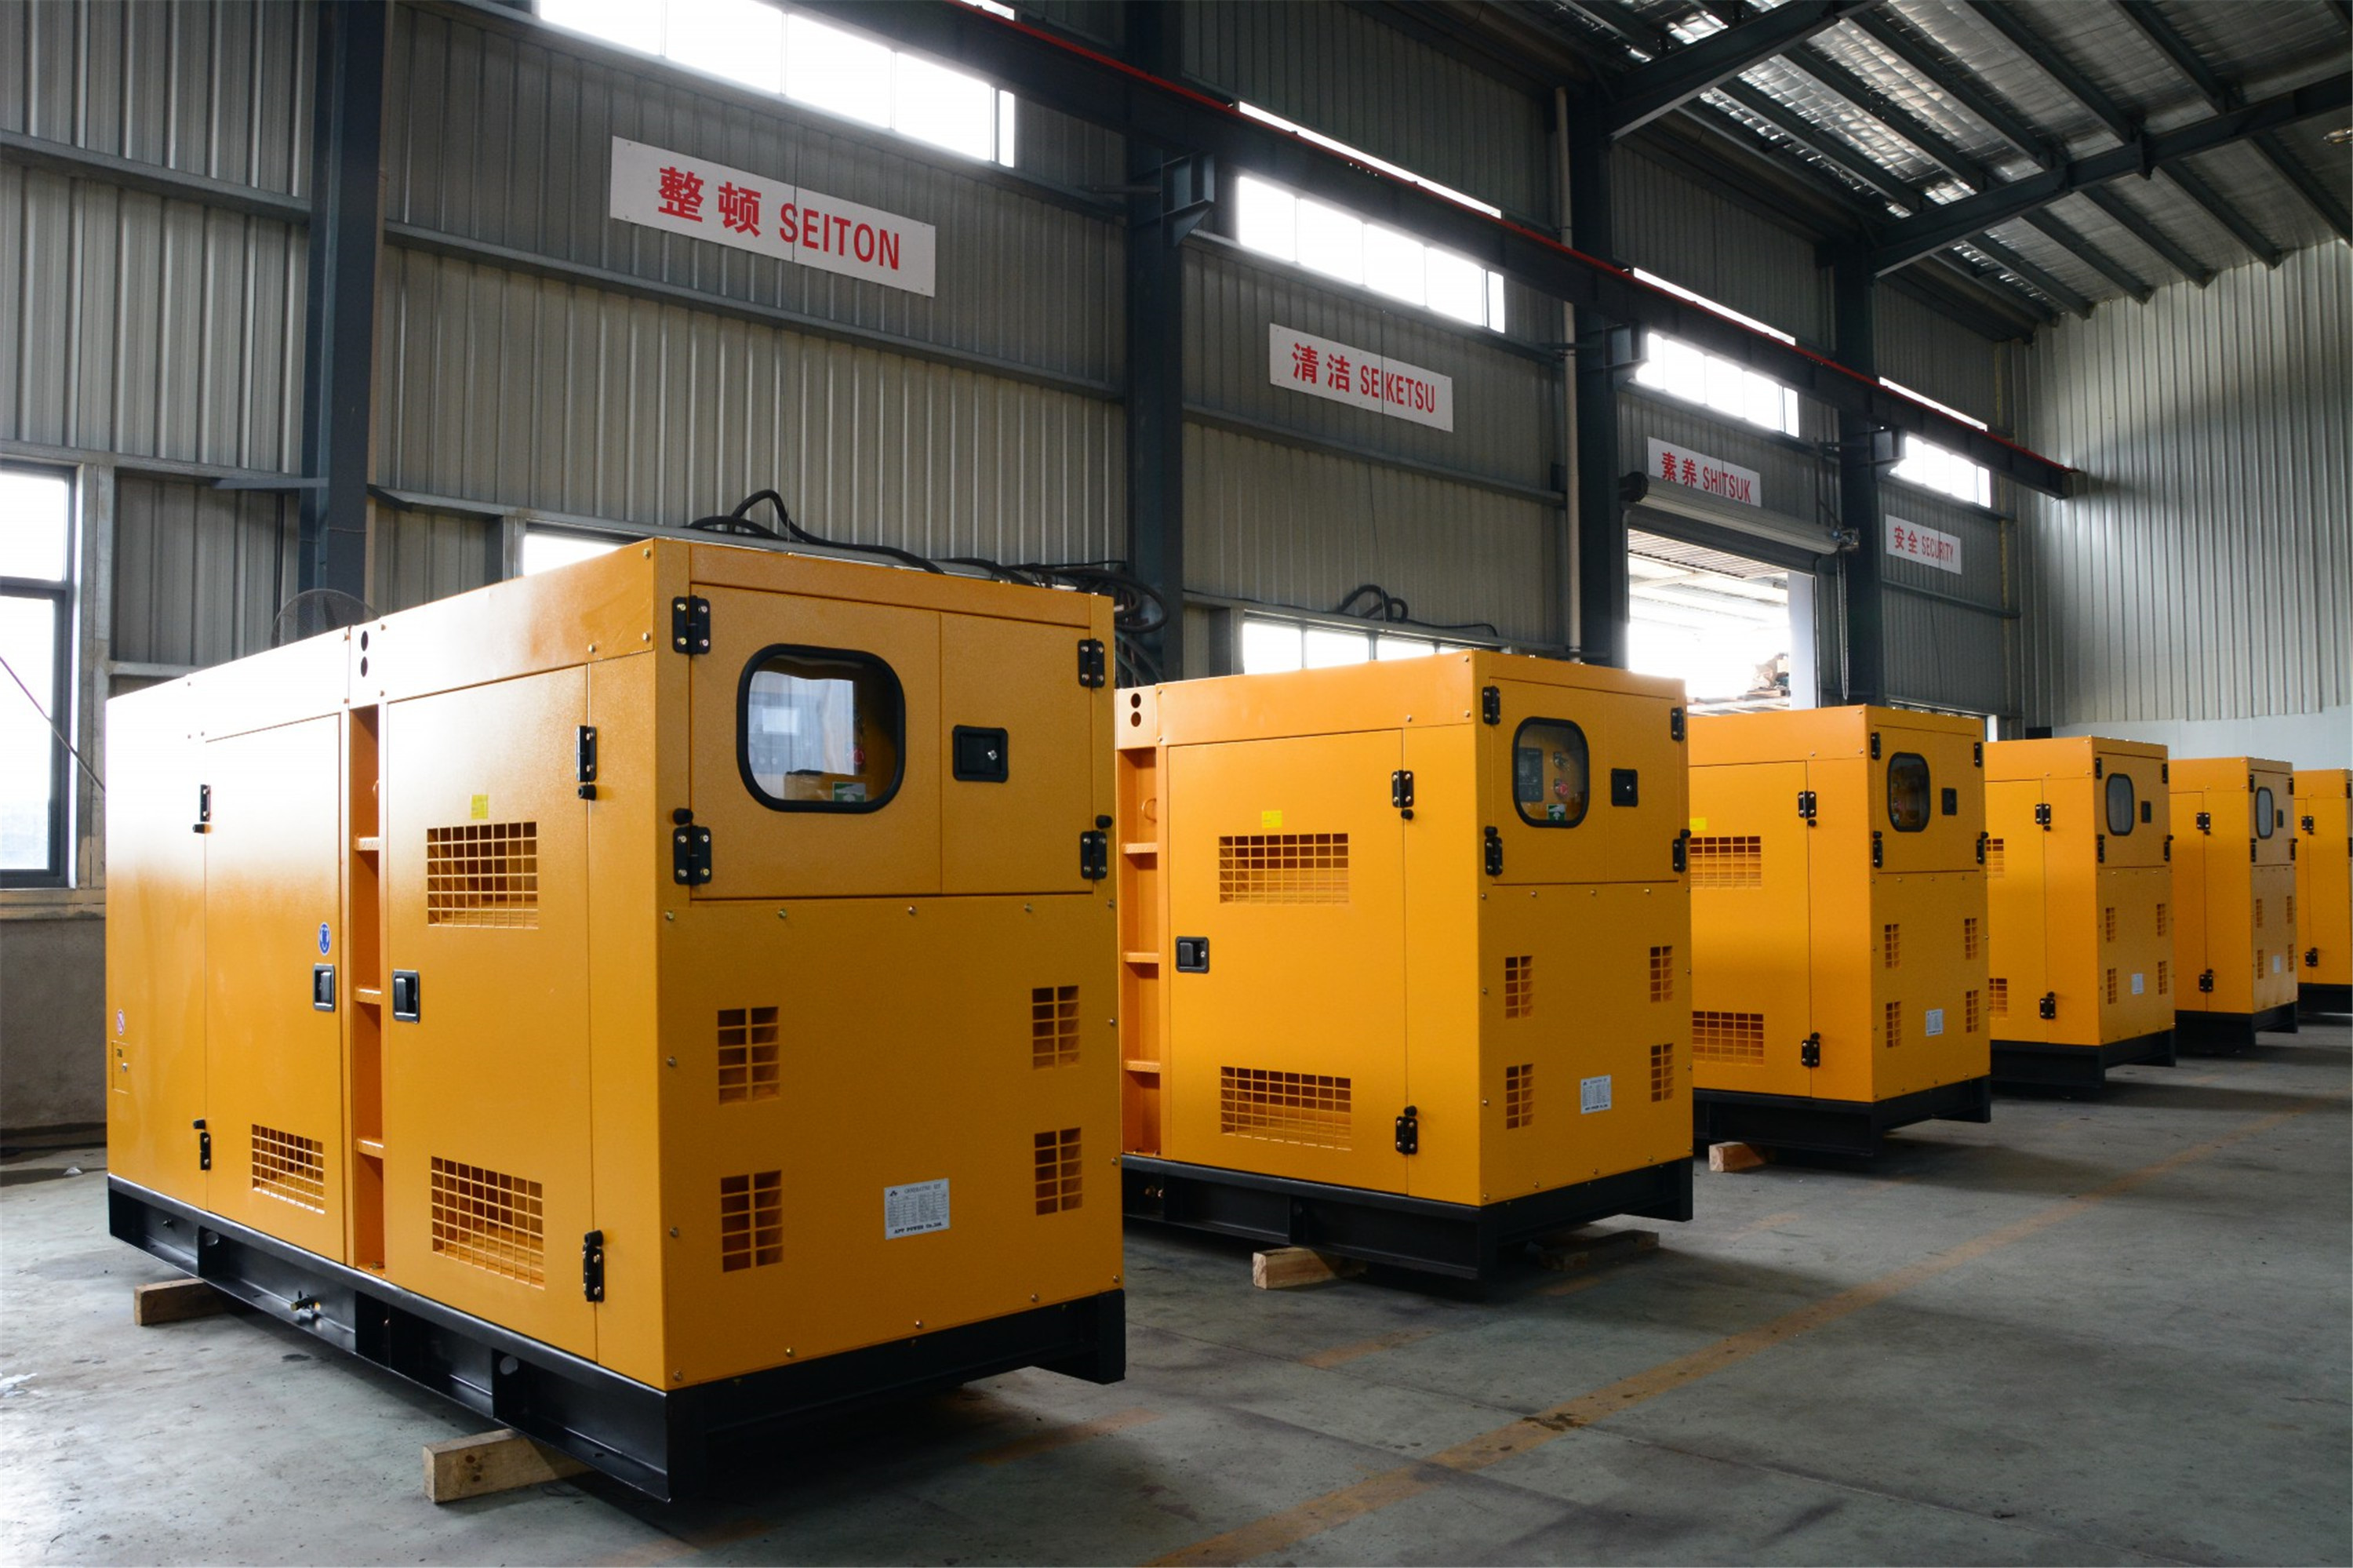  Chinese Brand Industrial Power Generator with Water Cooled System Running at 50Hz Manufactures